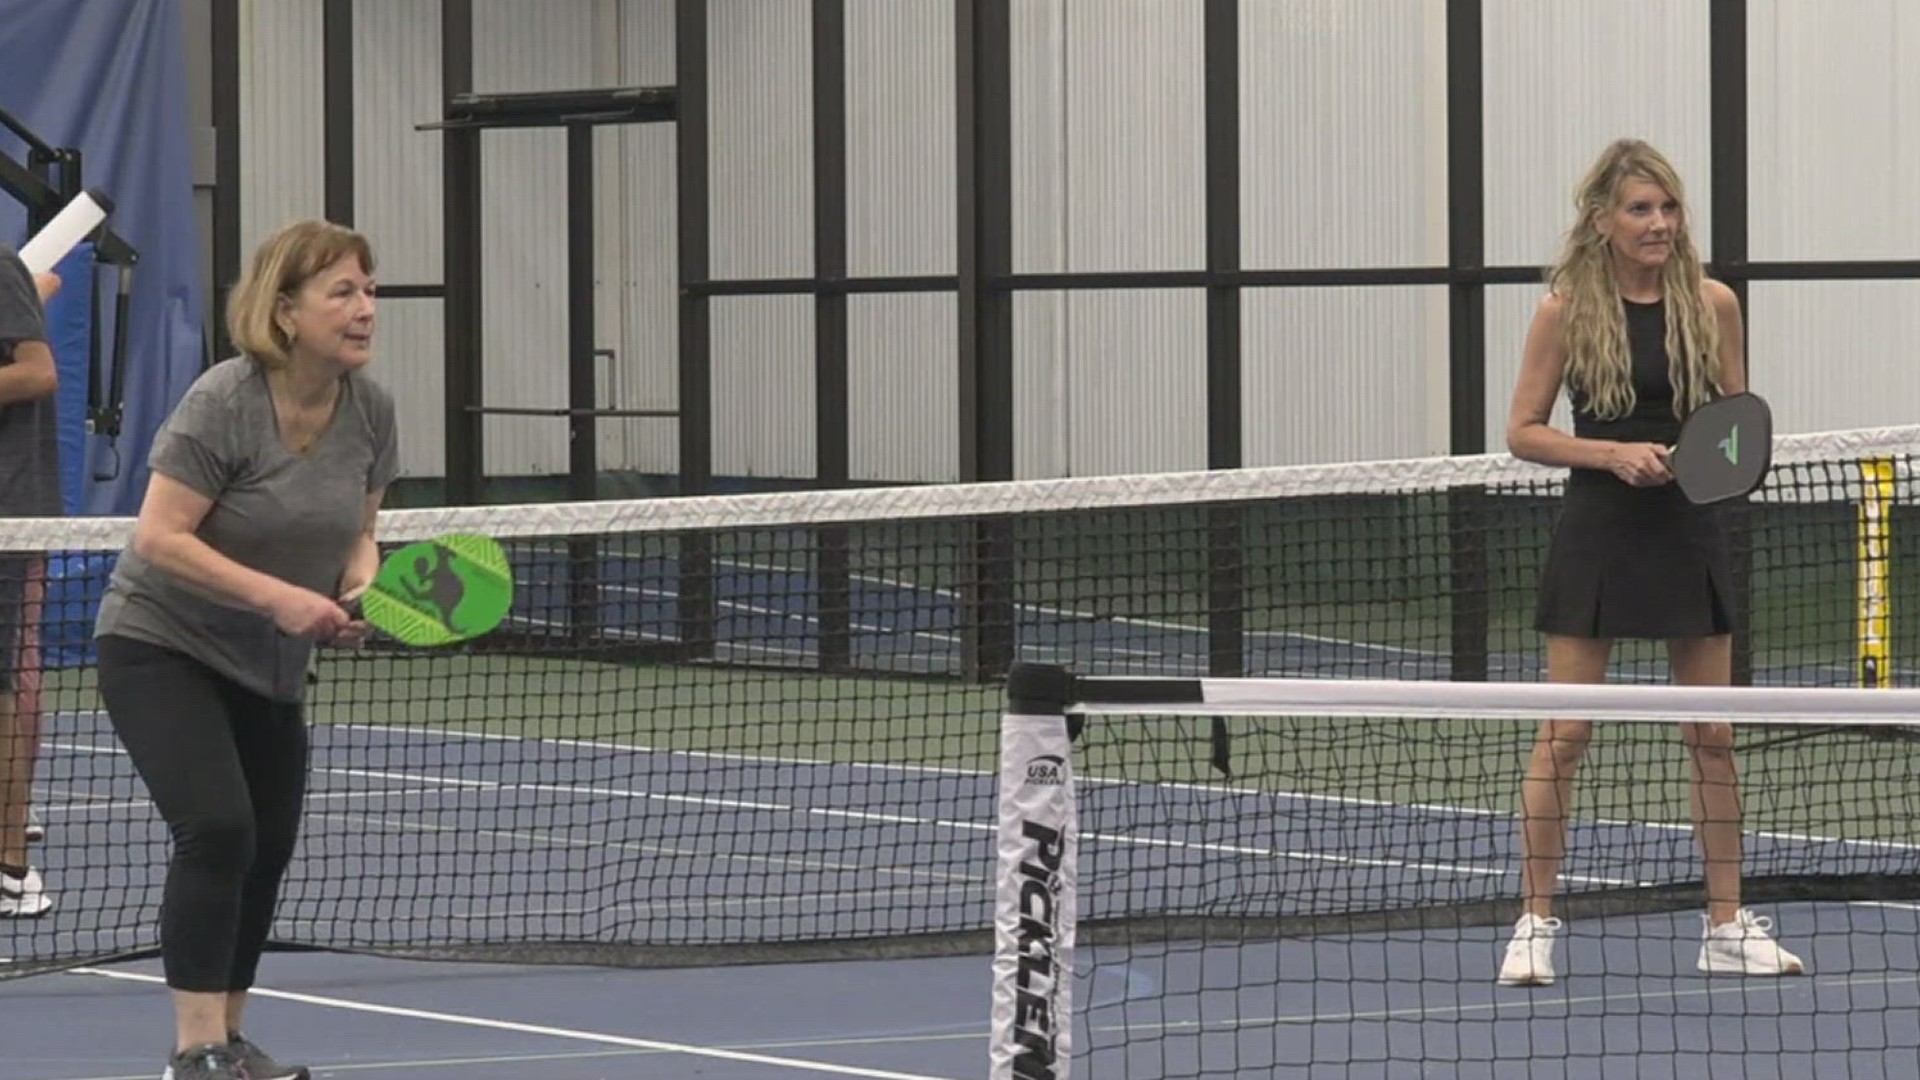 President Tom Deimler says the expansion was necessary in order to keep up with the pickleball craze.